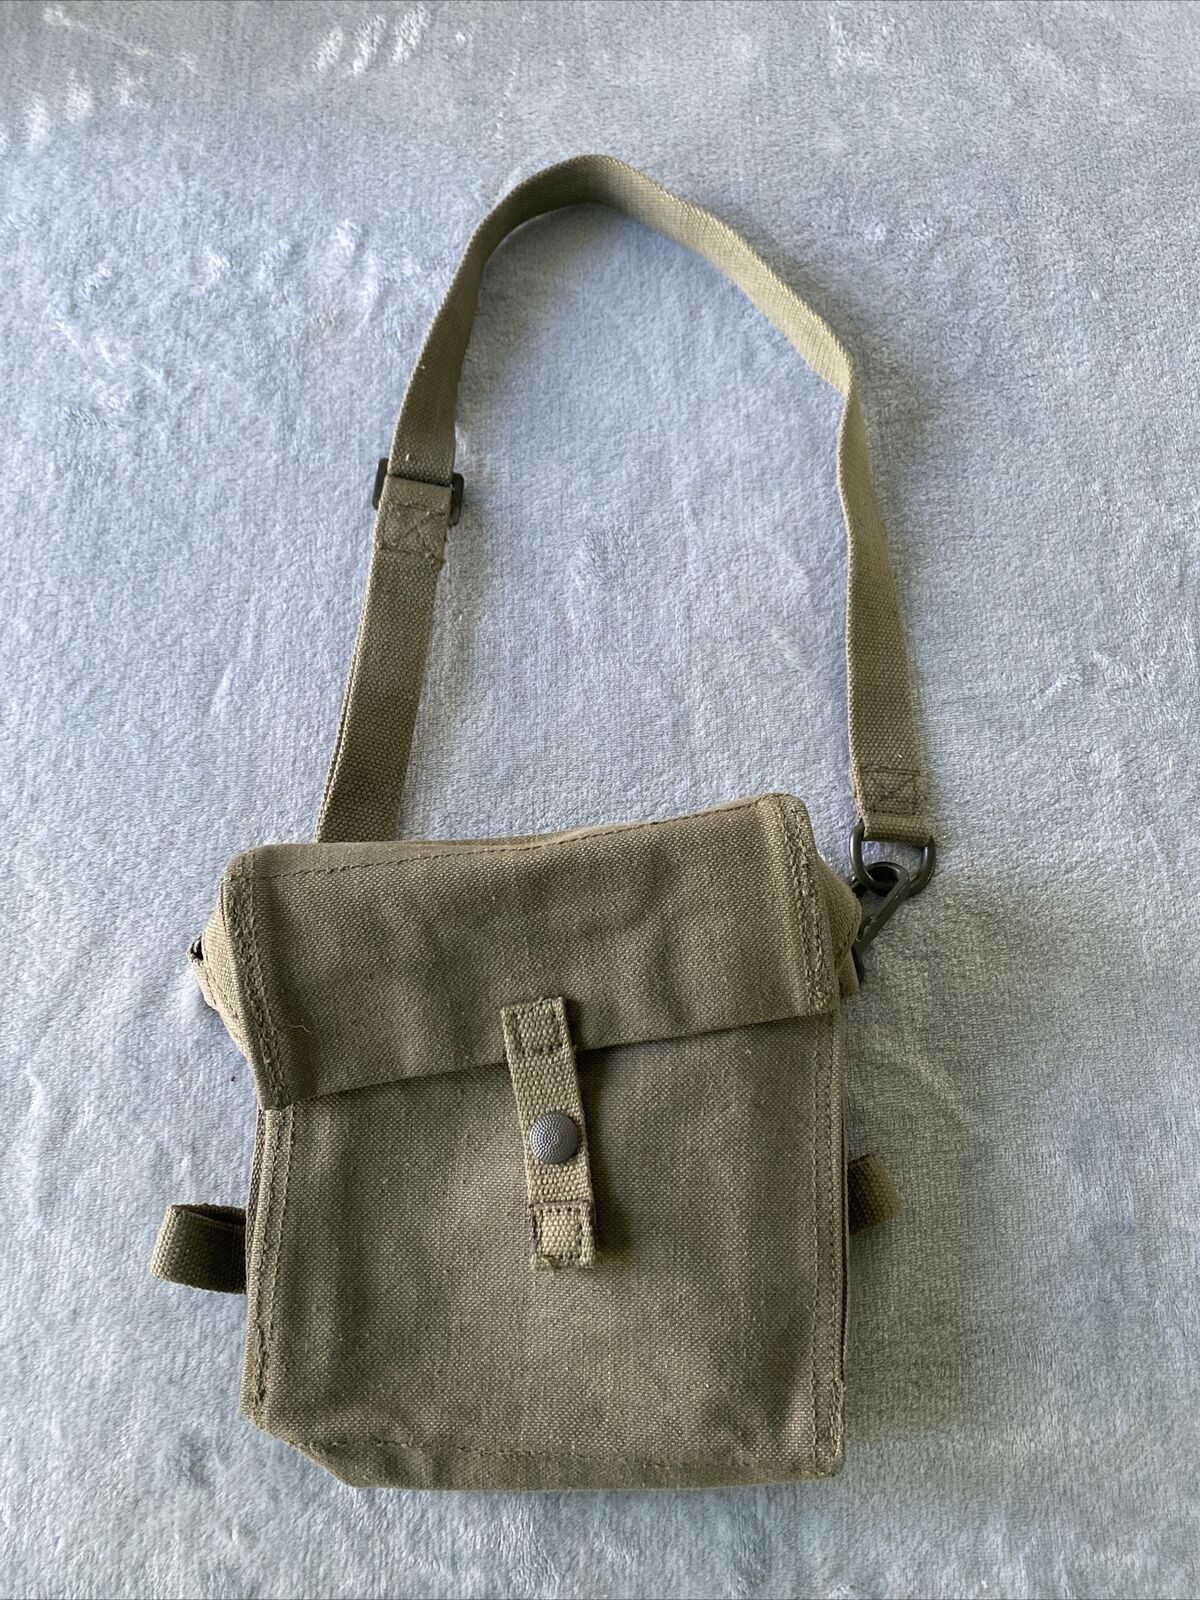 Military Canvas Satchel Small Bag Canteen Pouch Army Green